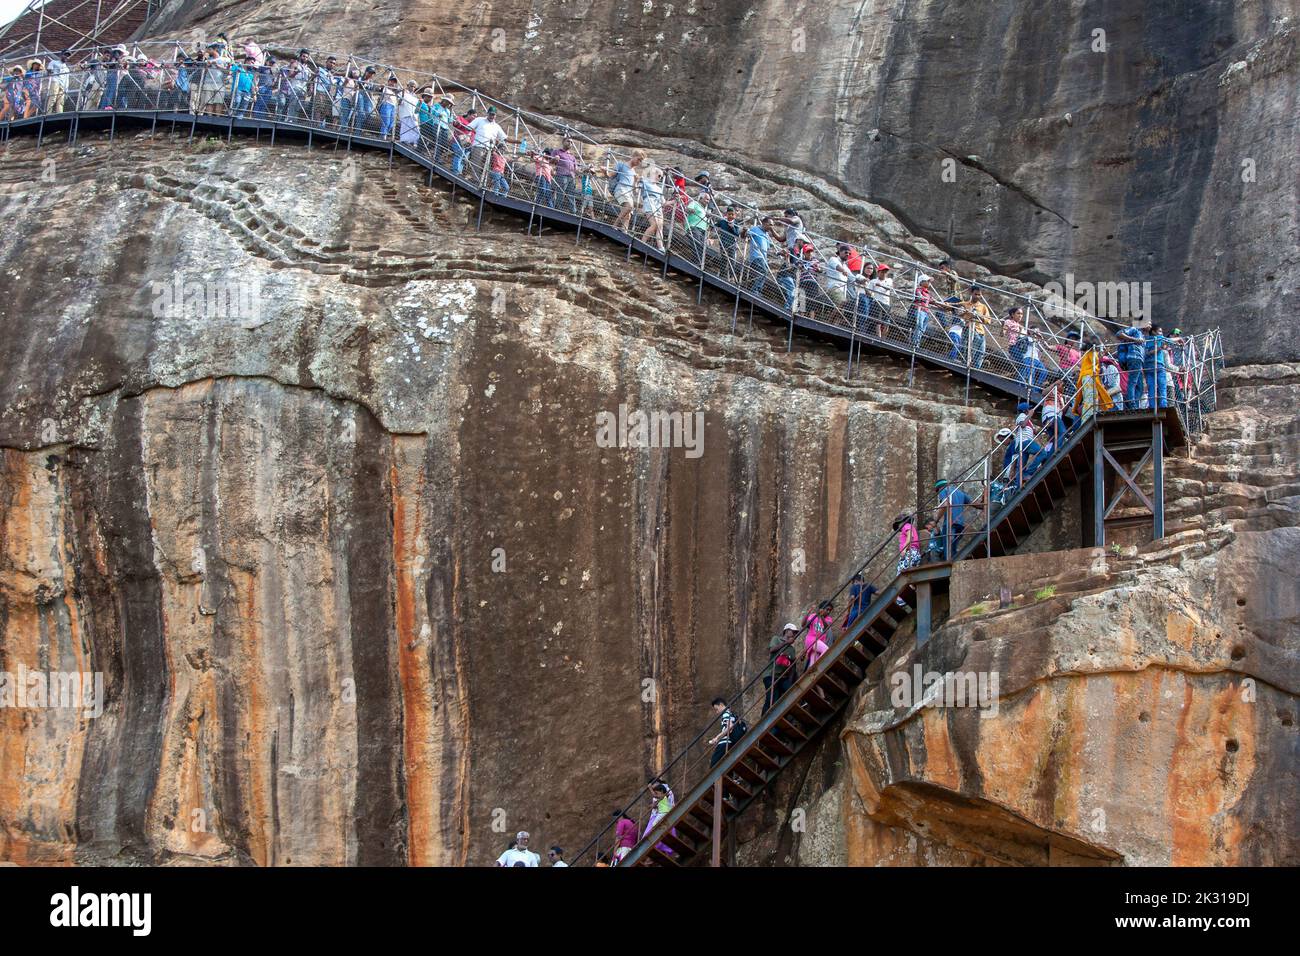 Visitors to Sigiriya Rock Fortress in Sri Lanka descend down the stairway from the summit to the Lion Platform. Stock Photo